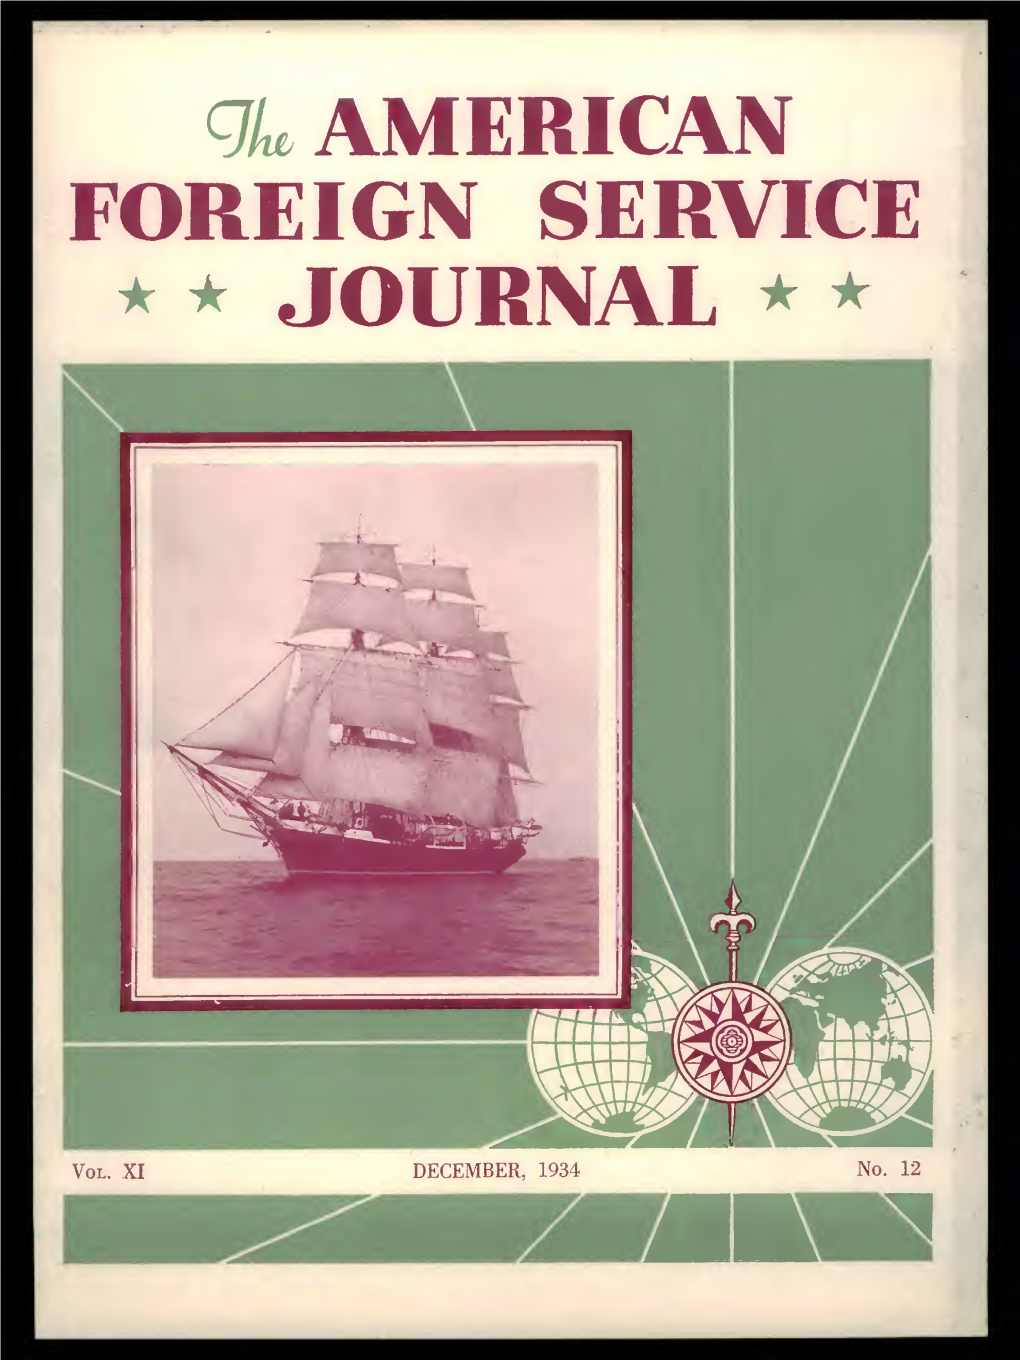 The Foreign Service Journal, December 1934